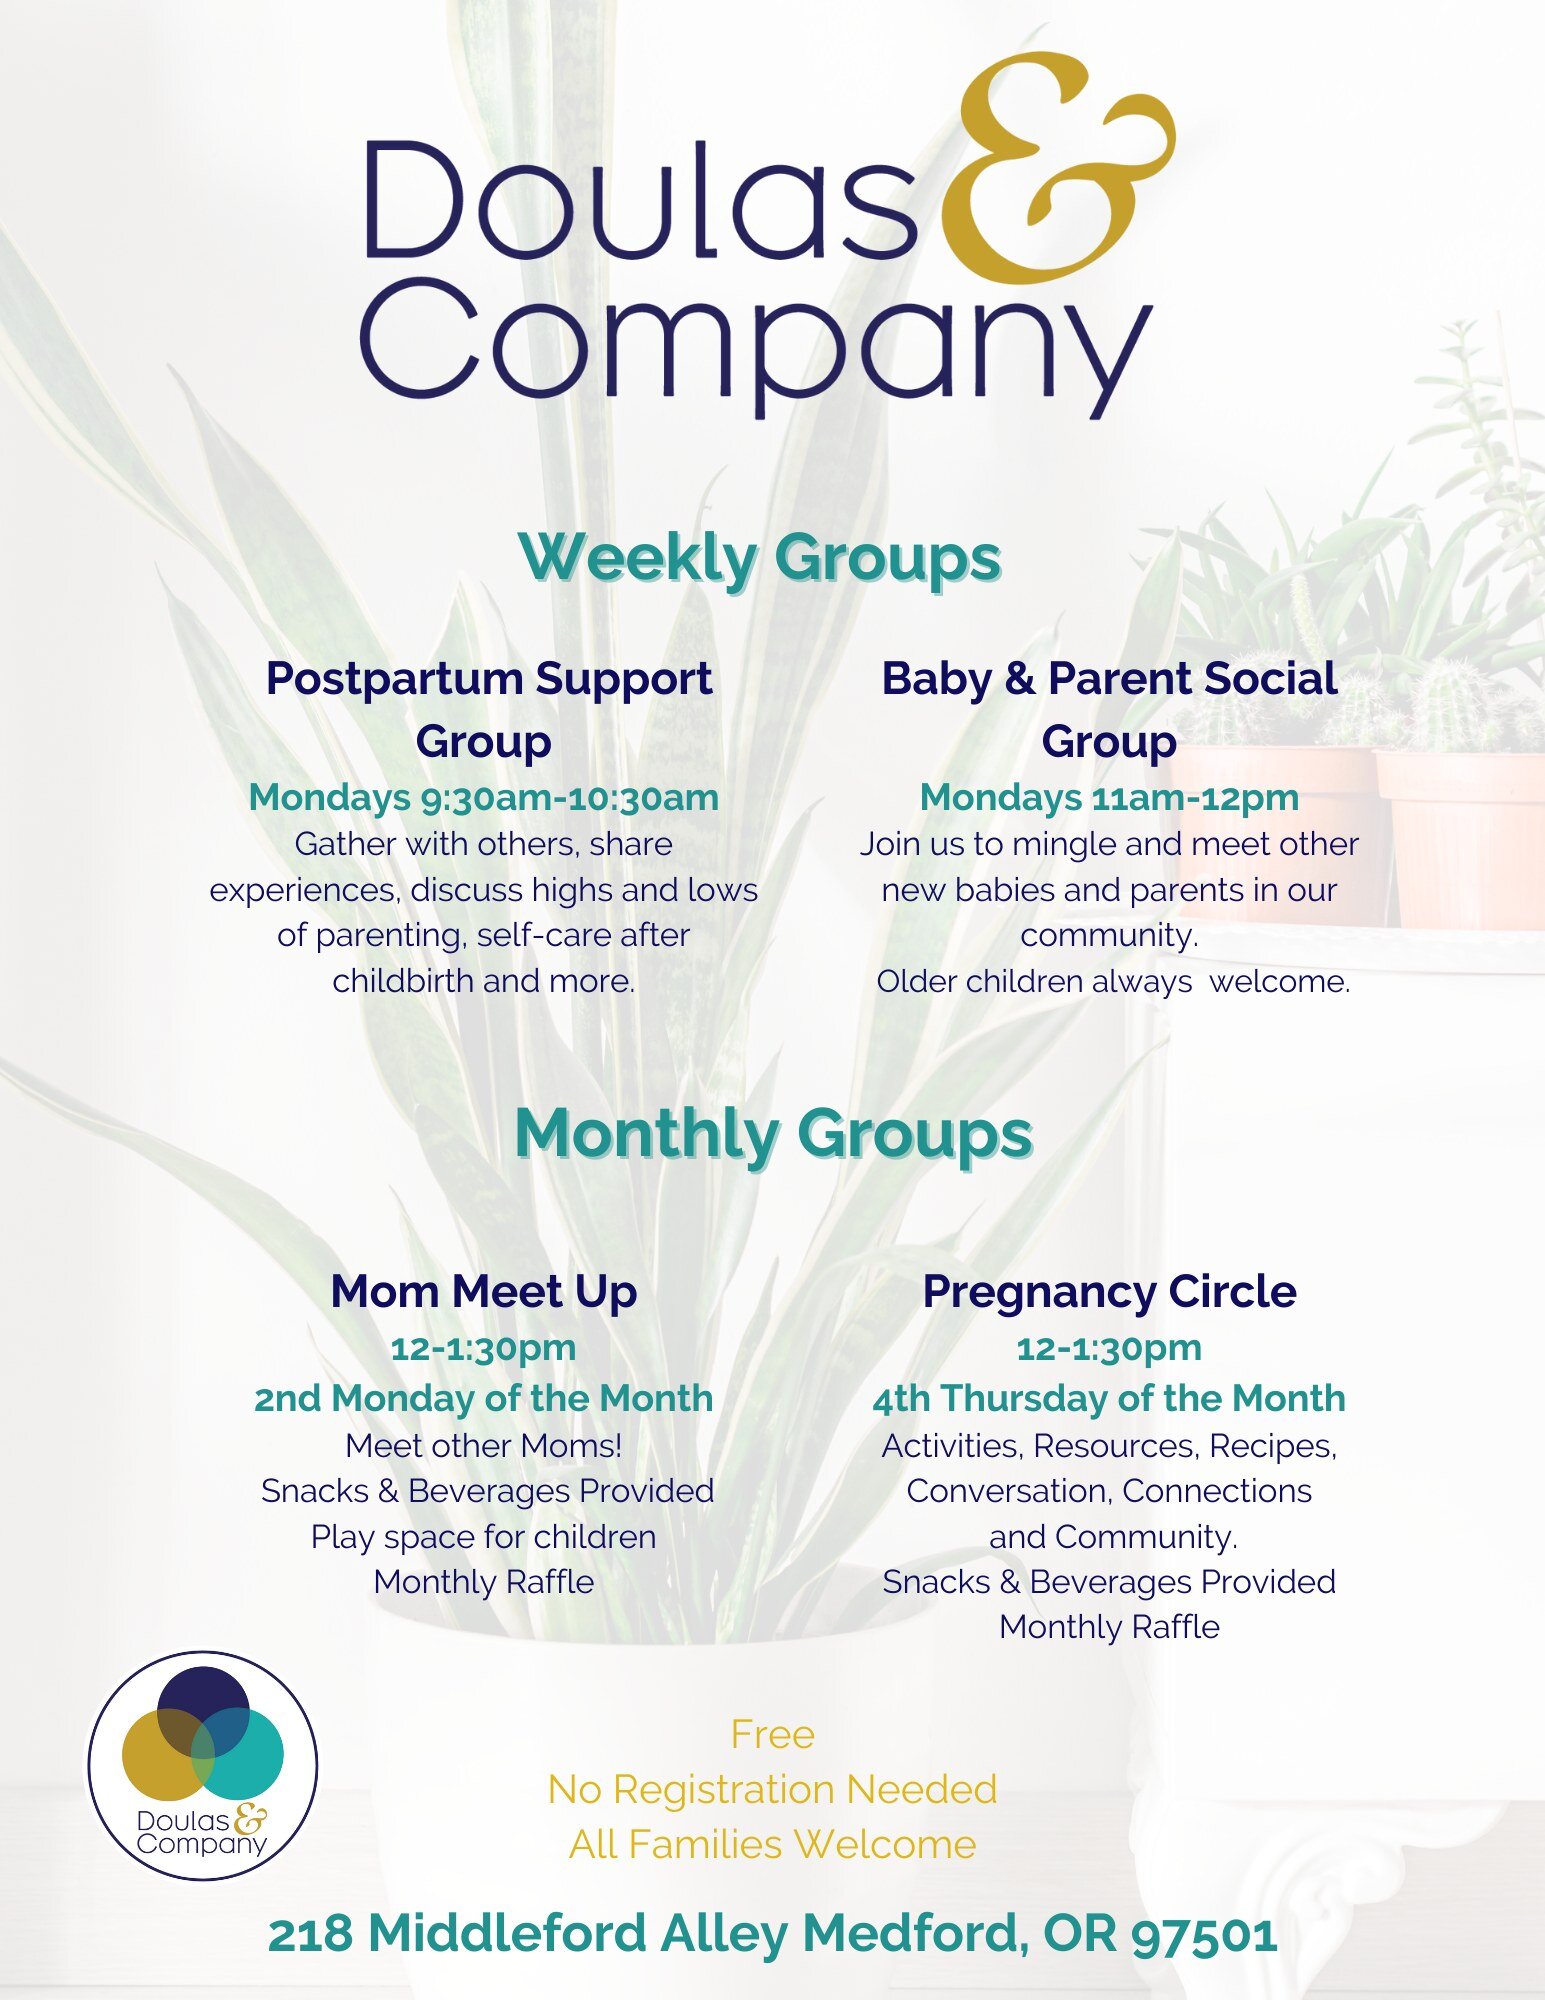 Current list of our  Groups.... more Groups and Events to come in our new space! 

Stayed tuned for updated group/event lists! 

#doulasandcompany #SouthernOregon #parentgroups #postpartumsupport #mommeetup